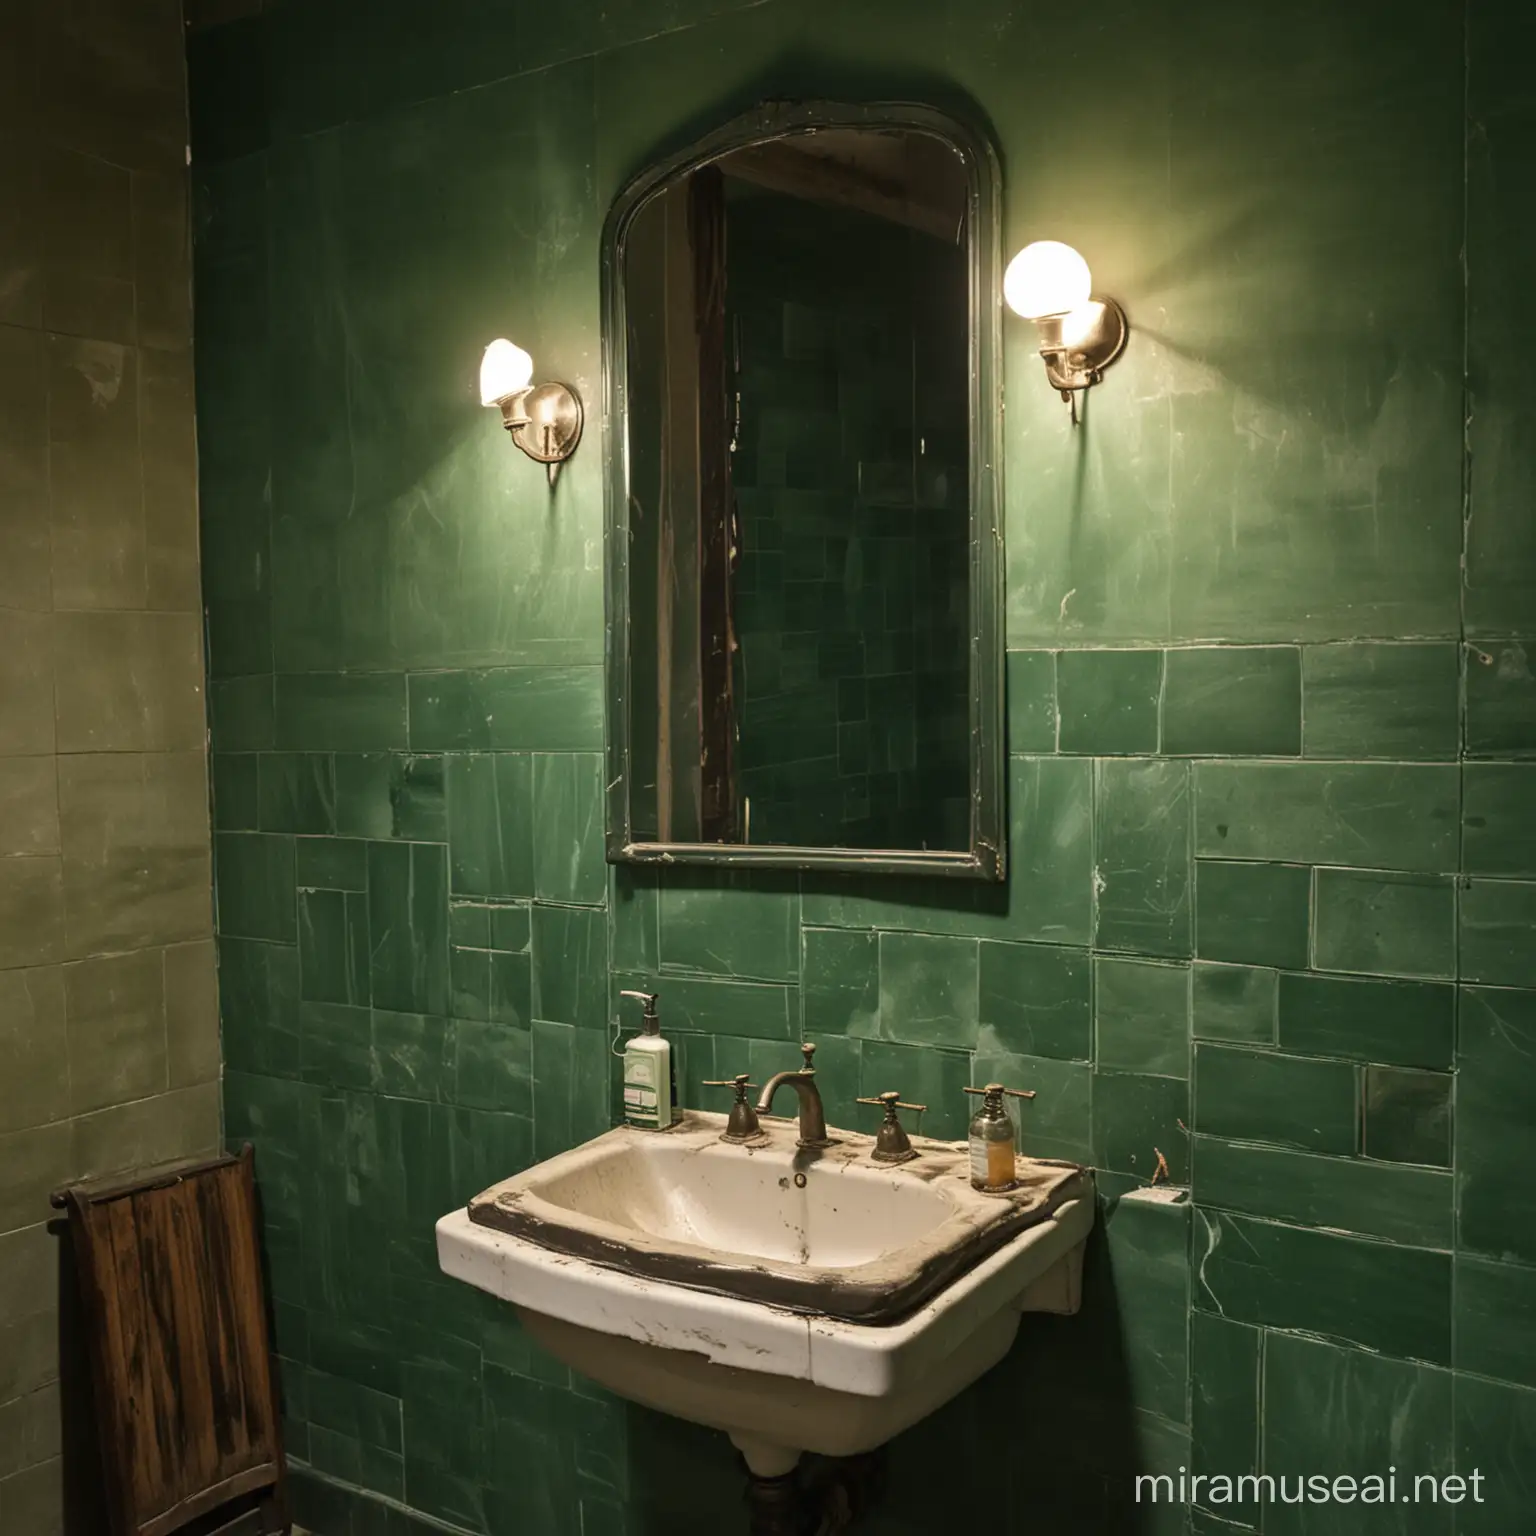 an old room with tiles on the walls, a mirror and a washbasin, dark green light